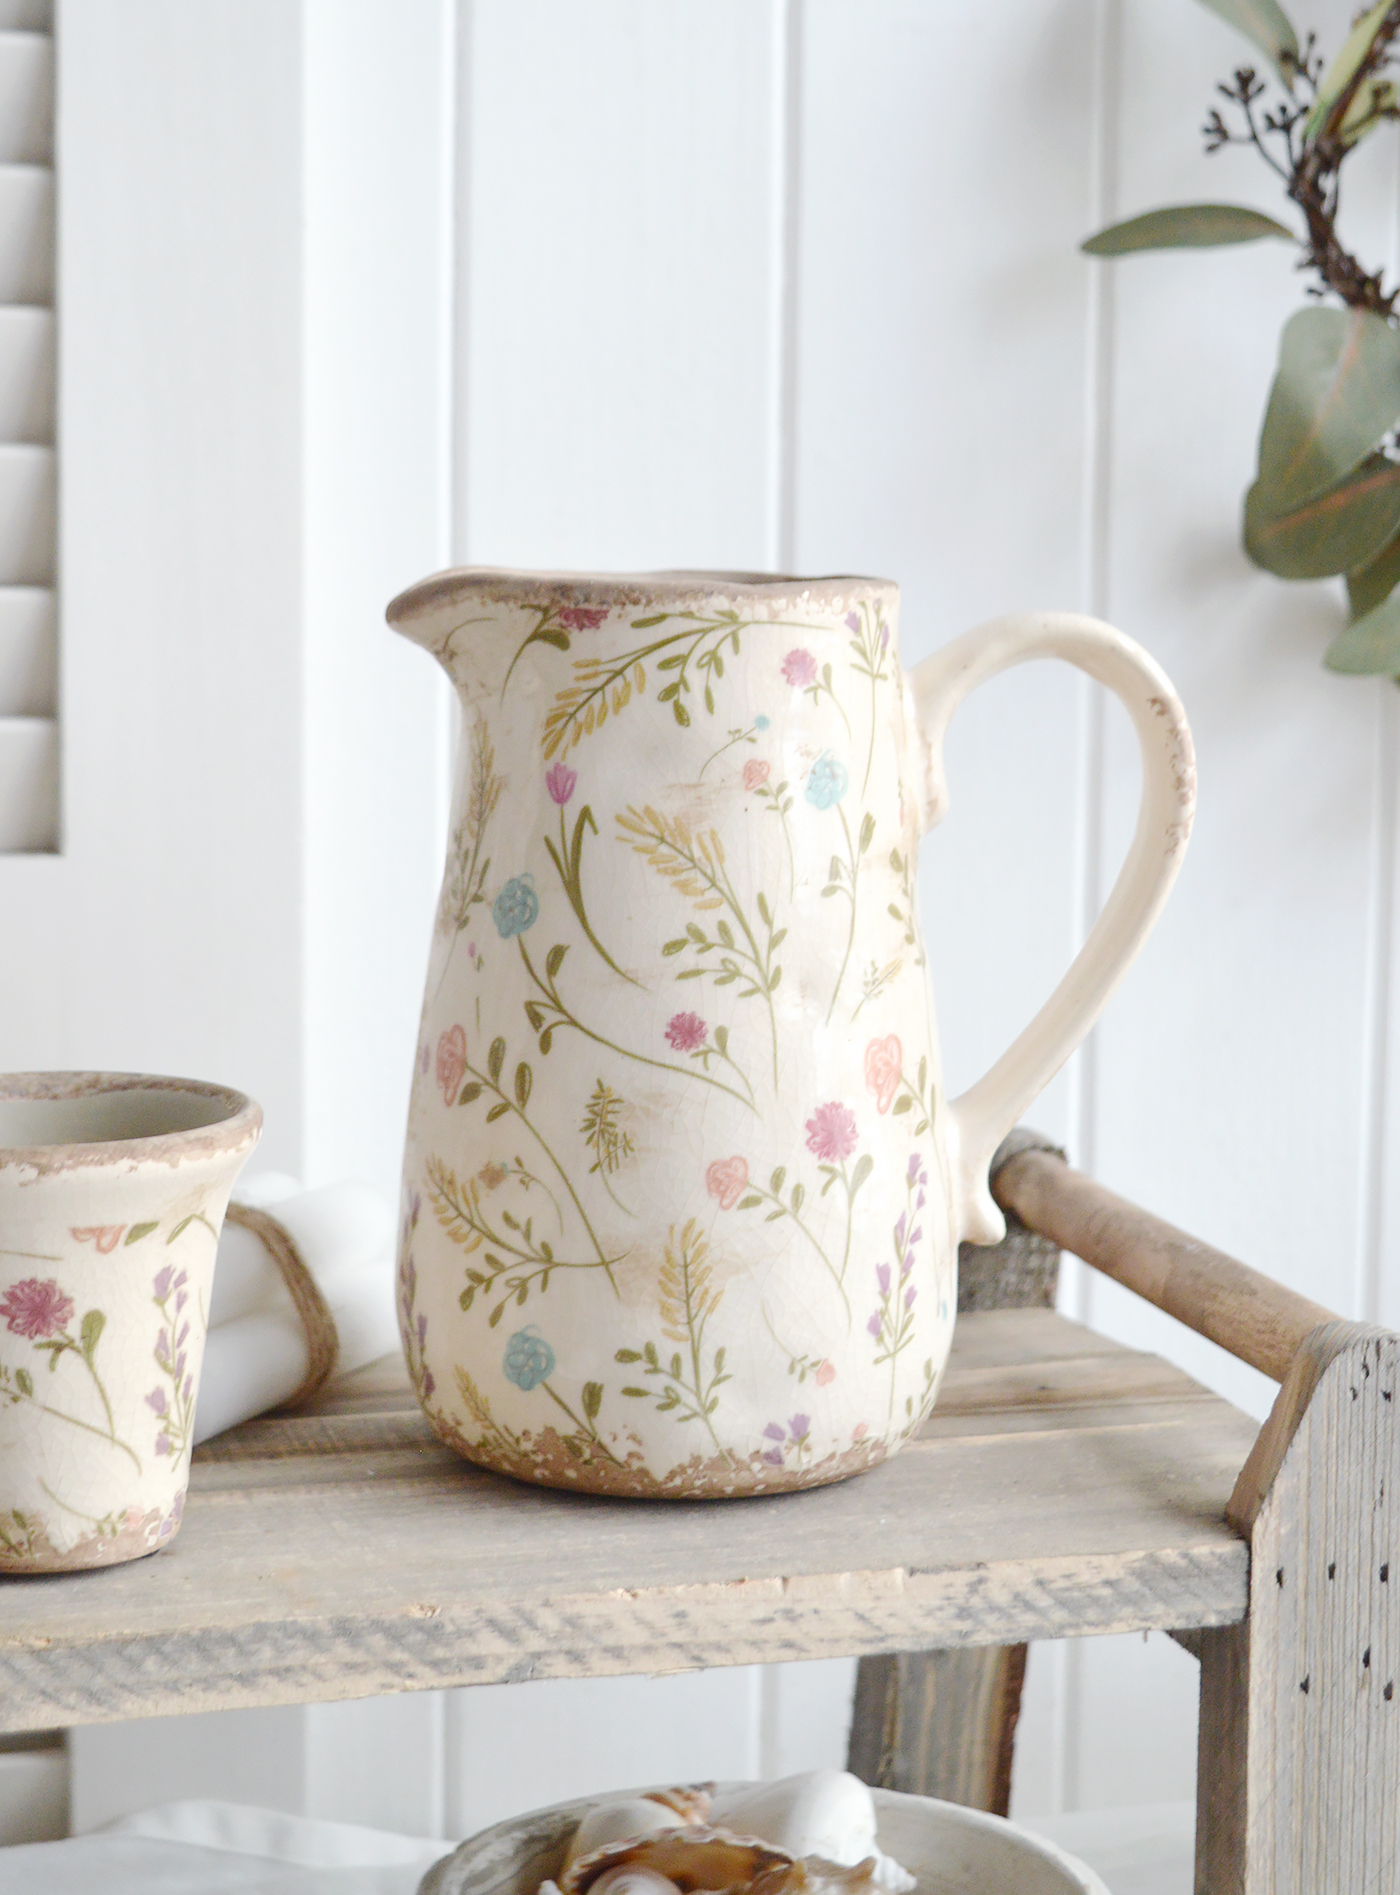 Marston Aged Vintage Style Ceramics. Pitcher vase jug - New England, coastal, modern farmhouse and country homes interiors and furniture